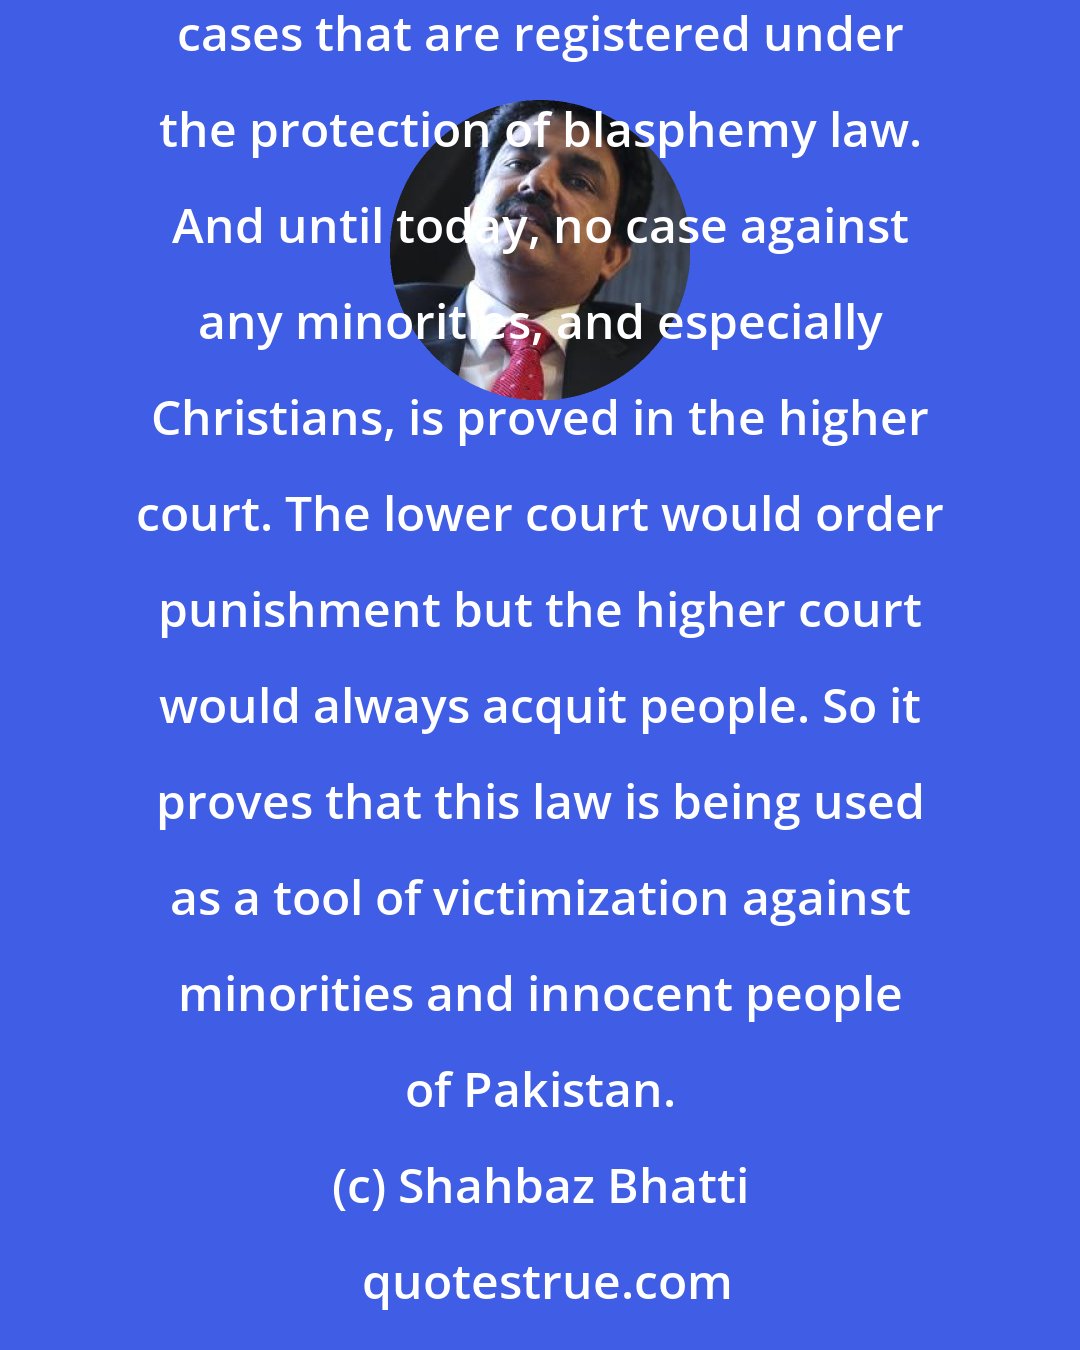 Shahbaz Bhatti: But when General Ziaul Haq introduced the strict blasphemy - 295 A, B, C - of Pakistan's penal code, then from 1986 to today there are hundreds cases that are registered under the protection of blasphemy law. And until today, no case against any minorities, and especially Christians, is proved in the higher court. The lower court would order punishment but the higher court would always acquit people. So it proves that this law is being used as a tool of victimization against minorities and innocent people of Pakistan.